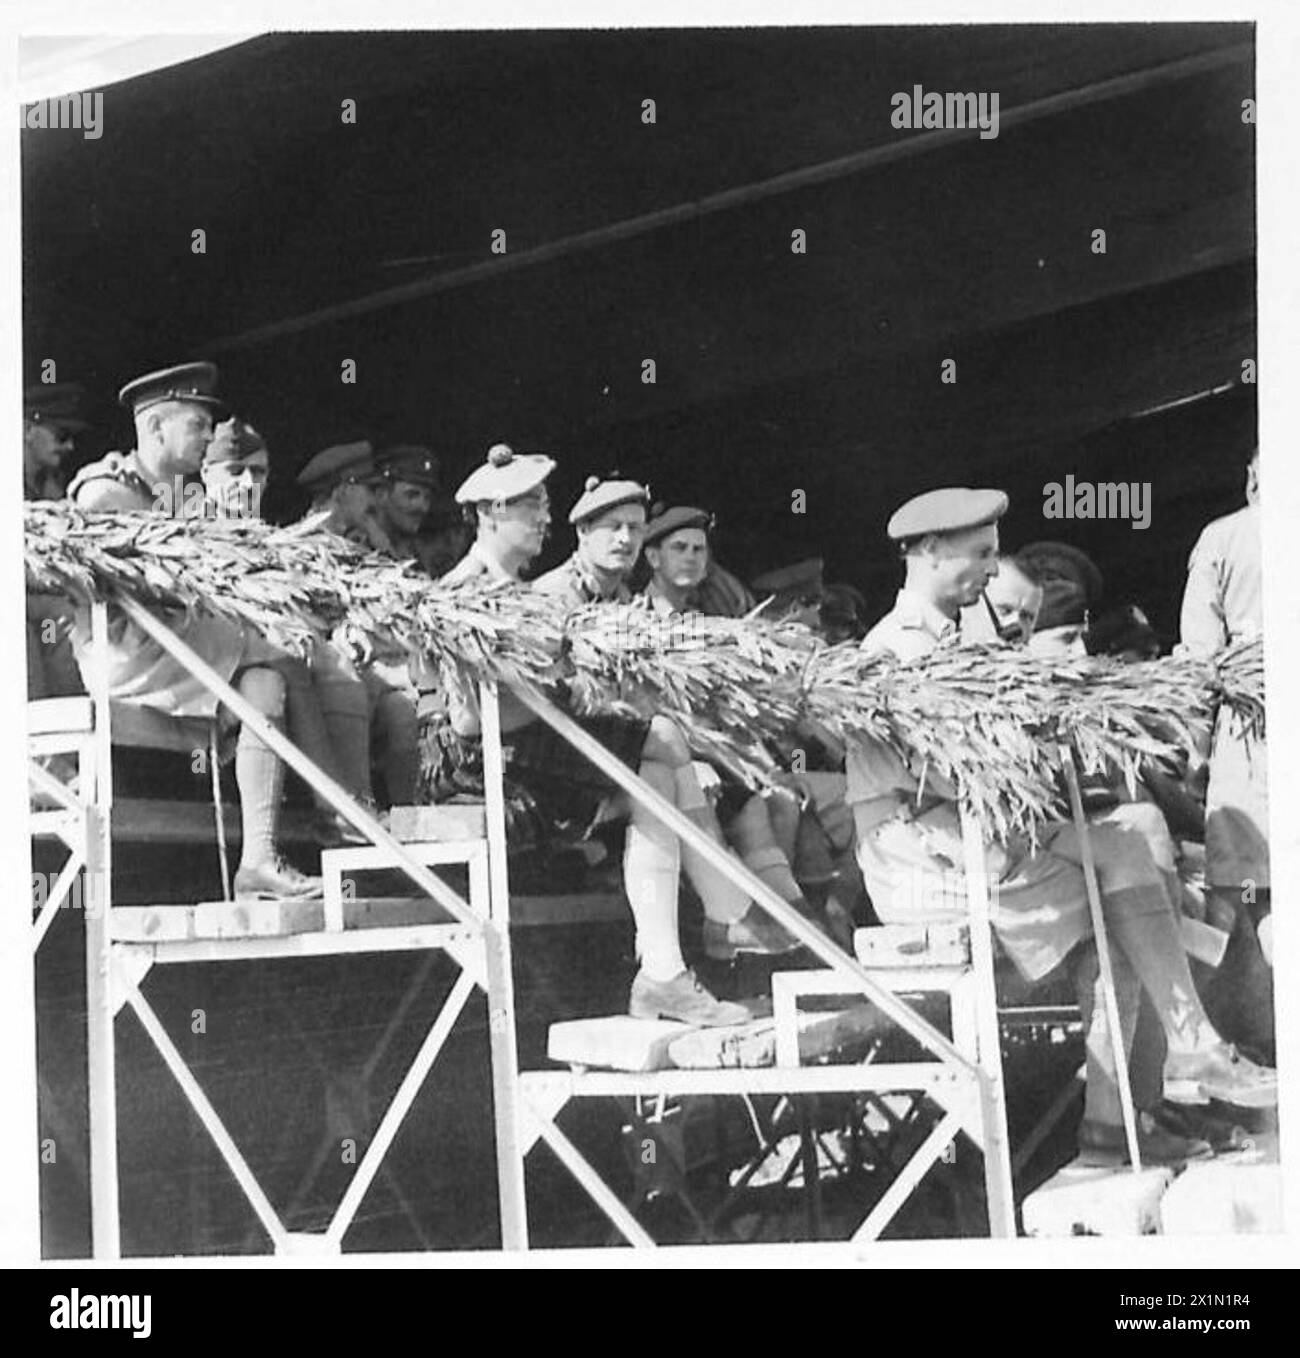 N. AFRICA (BEJA) RACE MEETING - British officers watch the races from the Grandstand, British Army Stock Photo